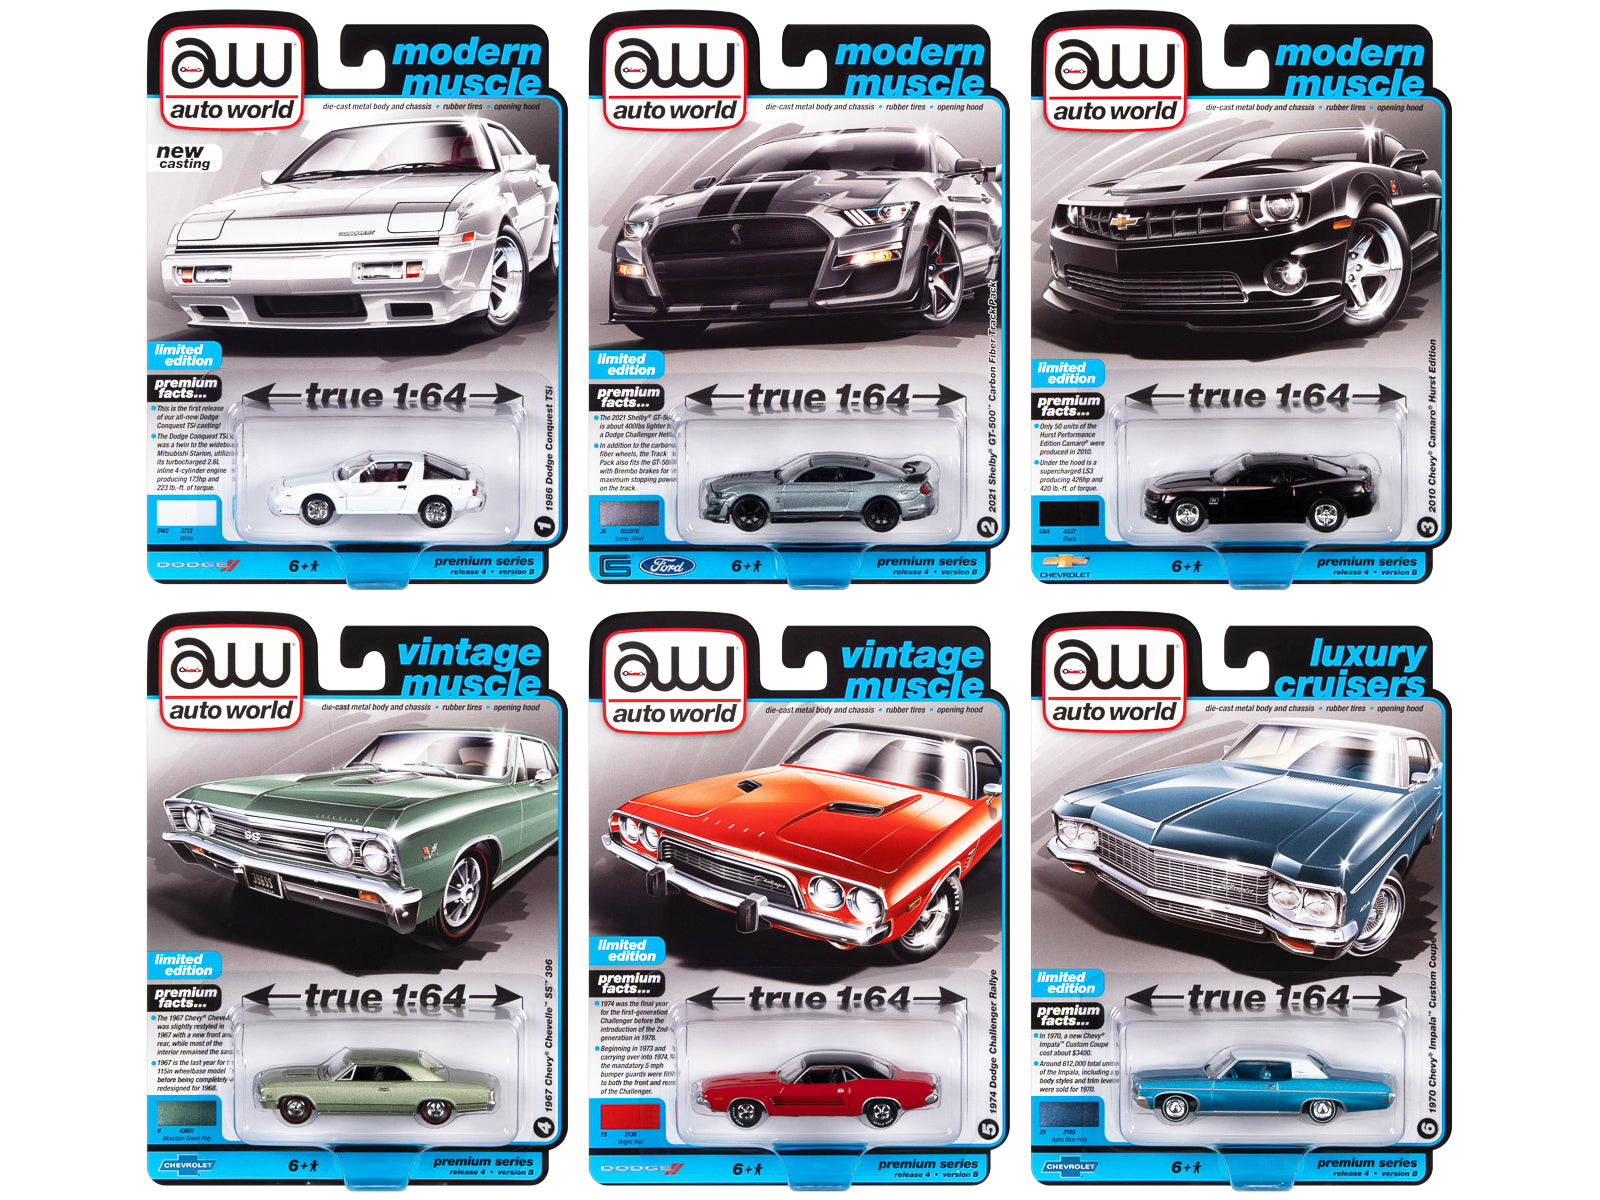 Auto World Premium 2022 Set B of 6 pieces Release 4 1/64 Diecast Model Cars by Auto World